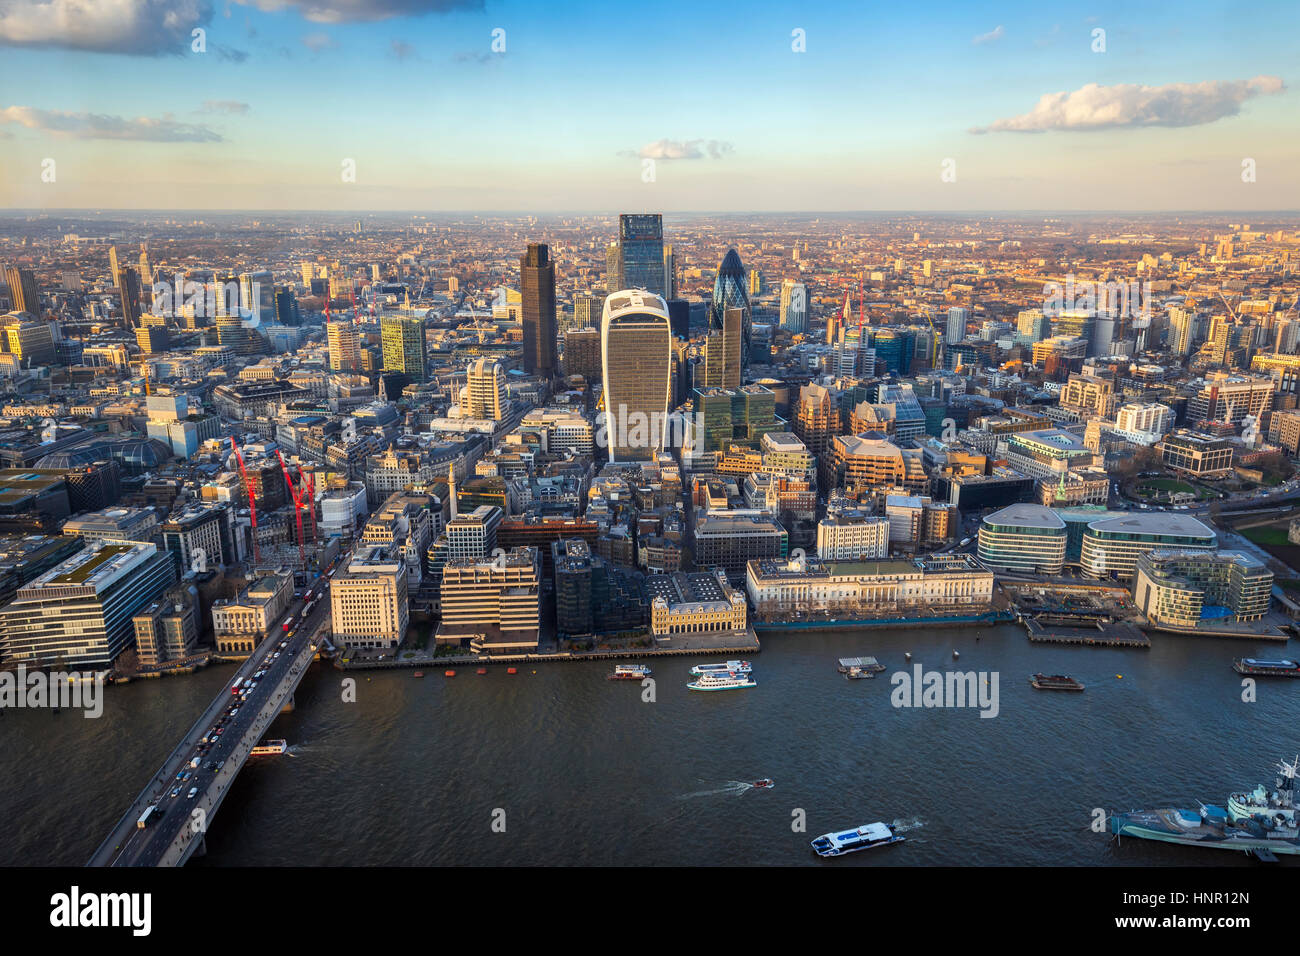 London, England - Aerial skyline view of the city of London at sunset ...